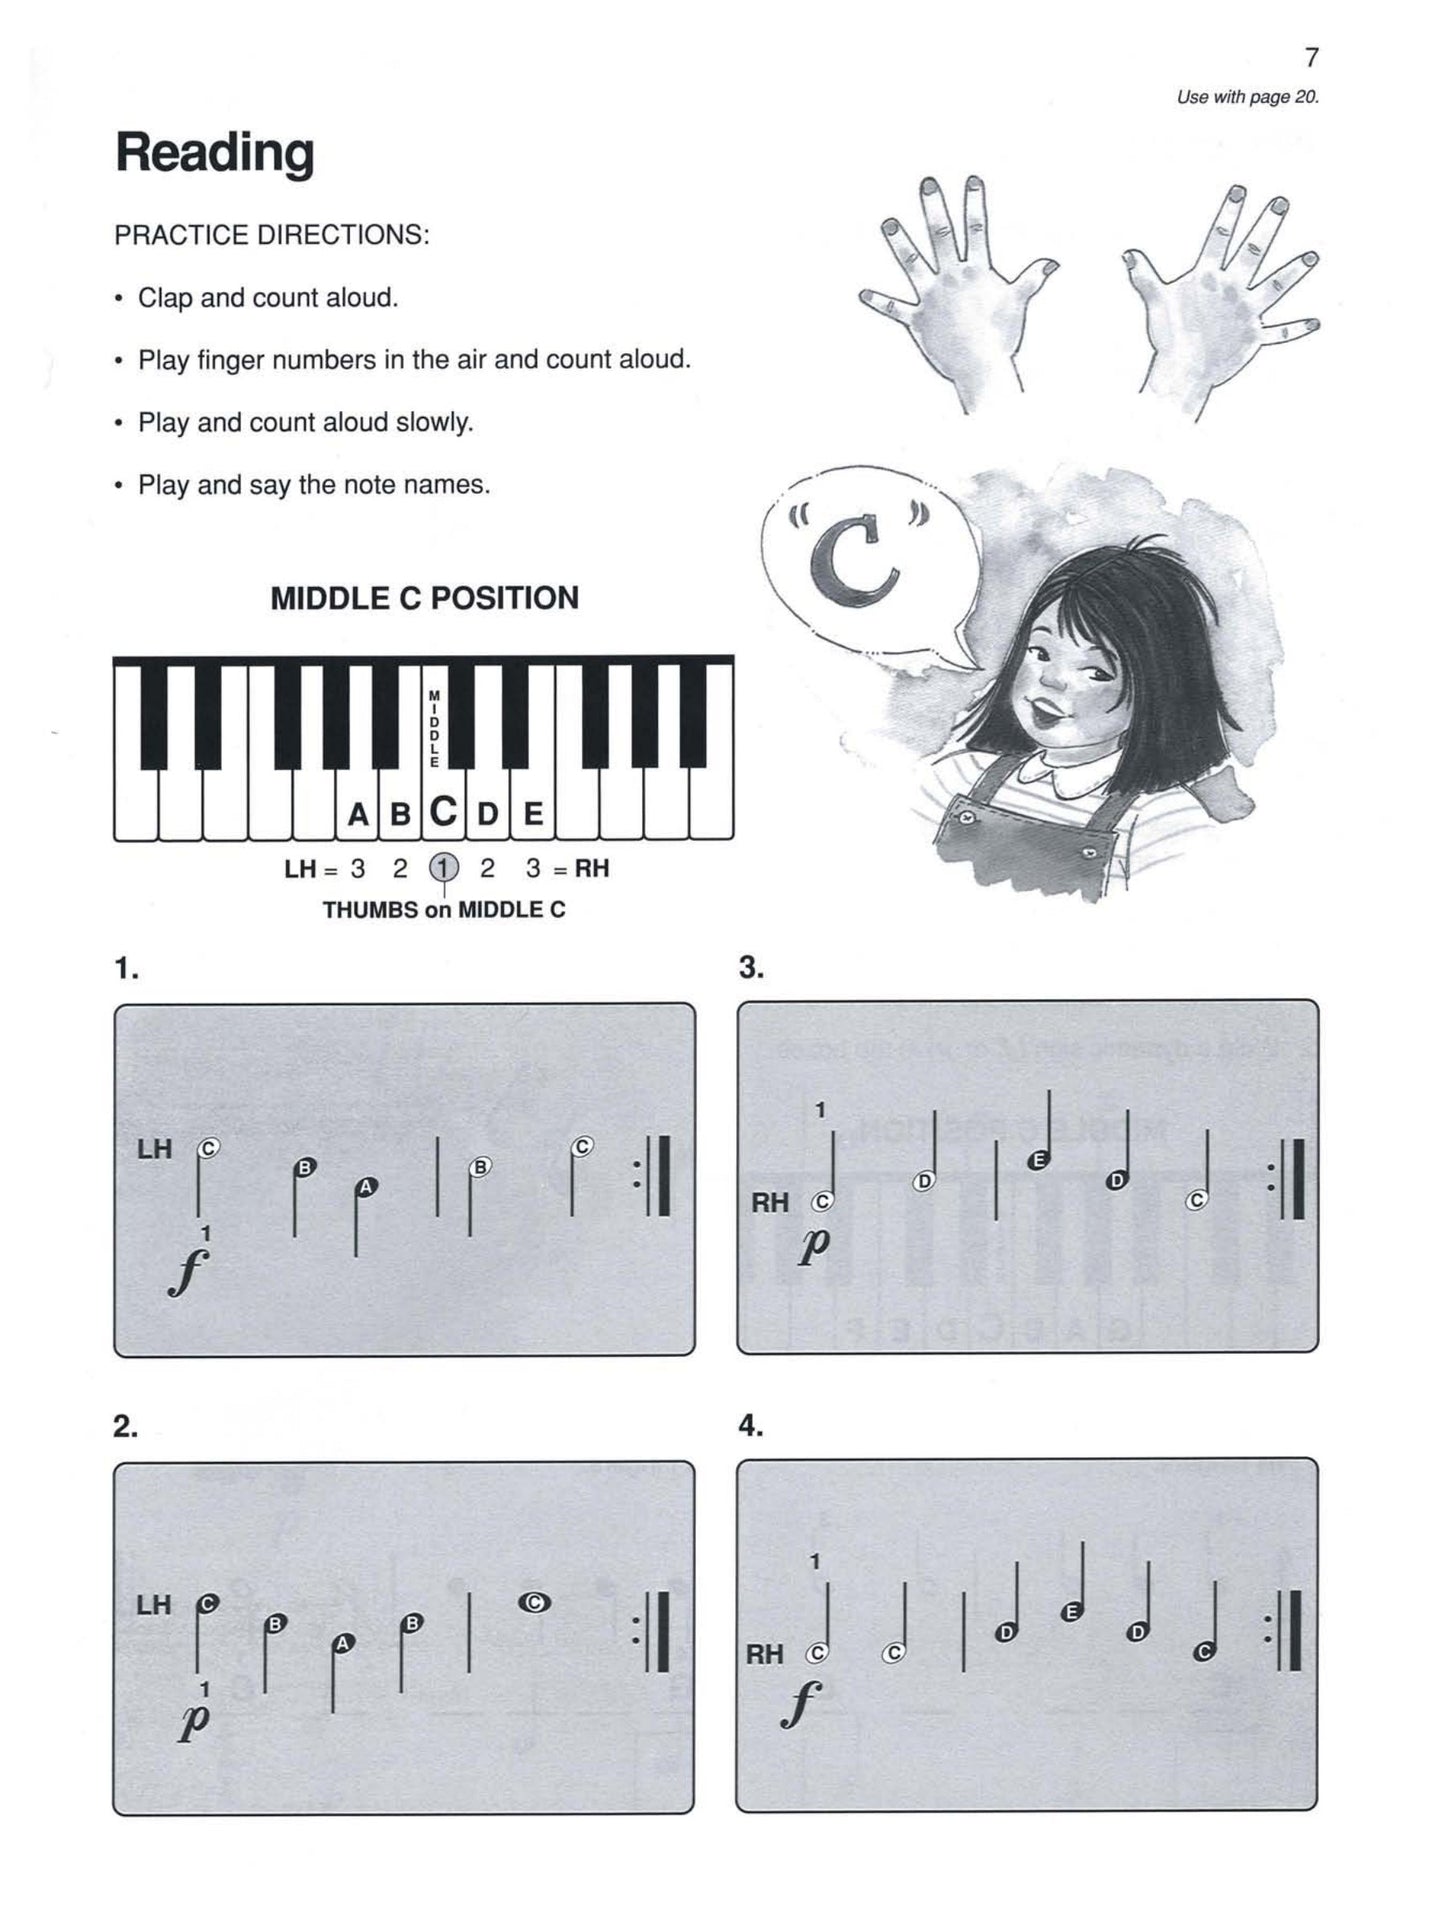 Alfred's Basic Piano Library - Sight Reading Level 1A Book